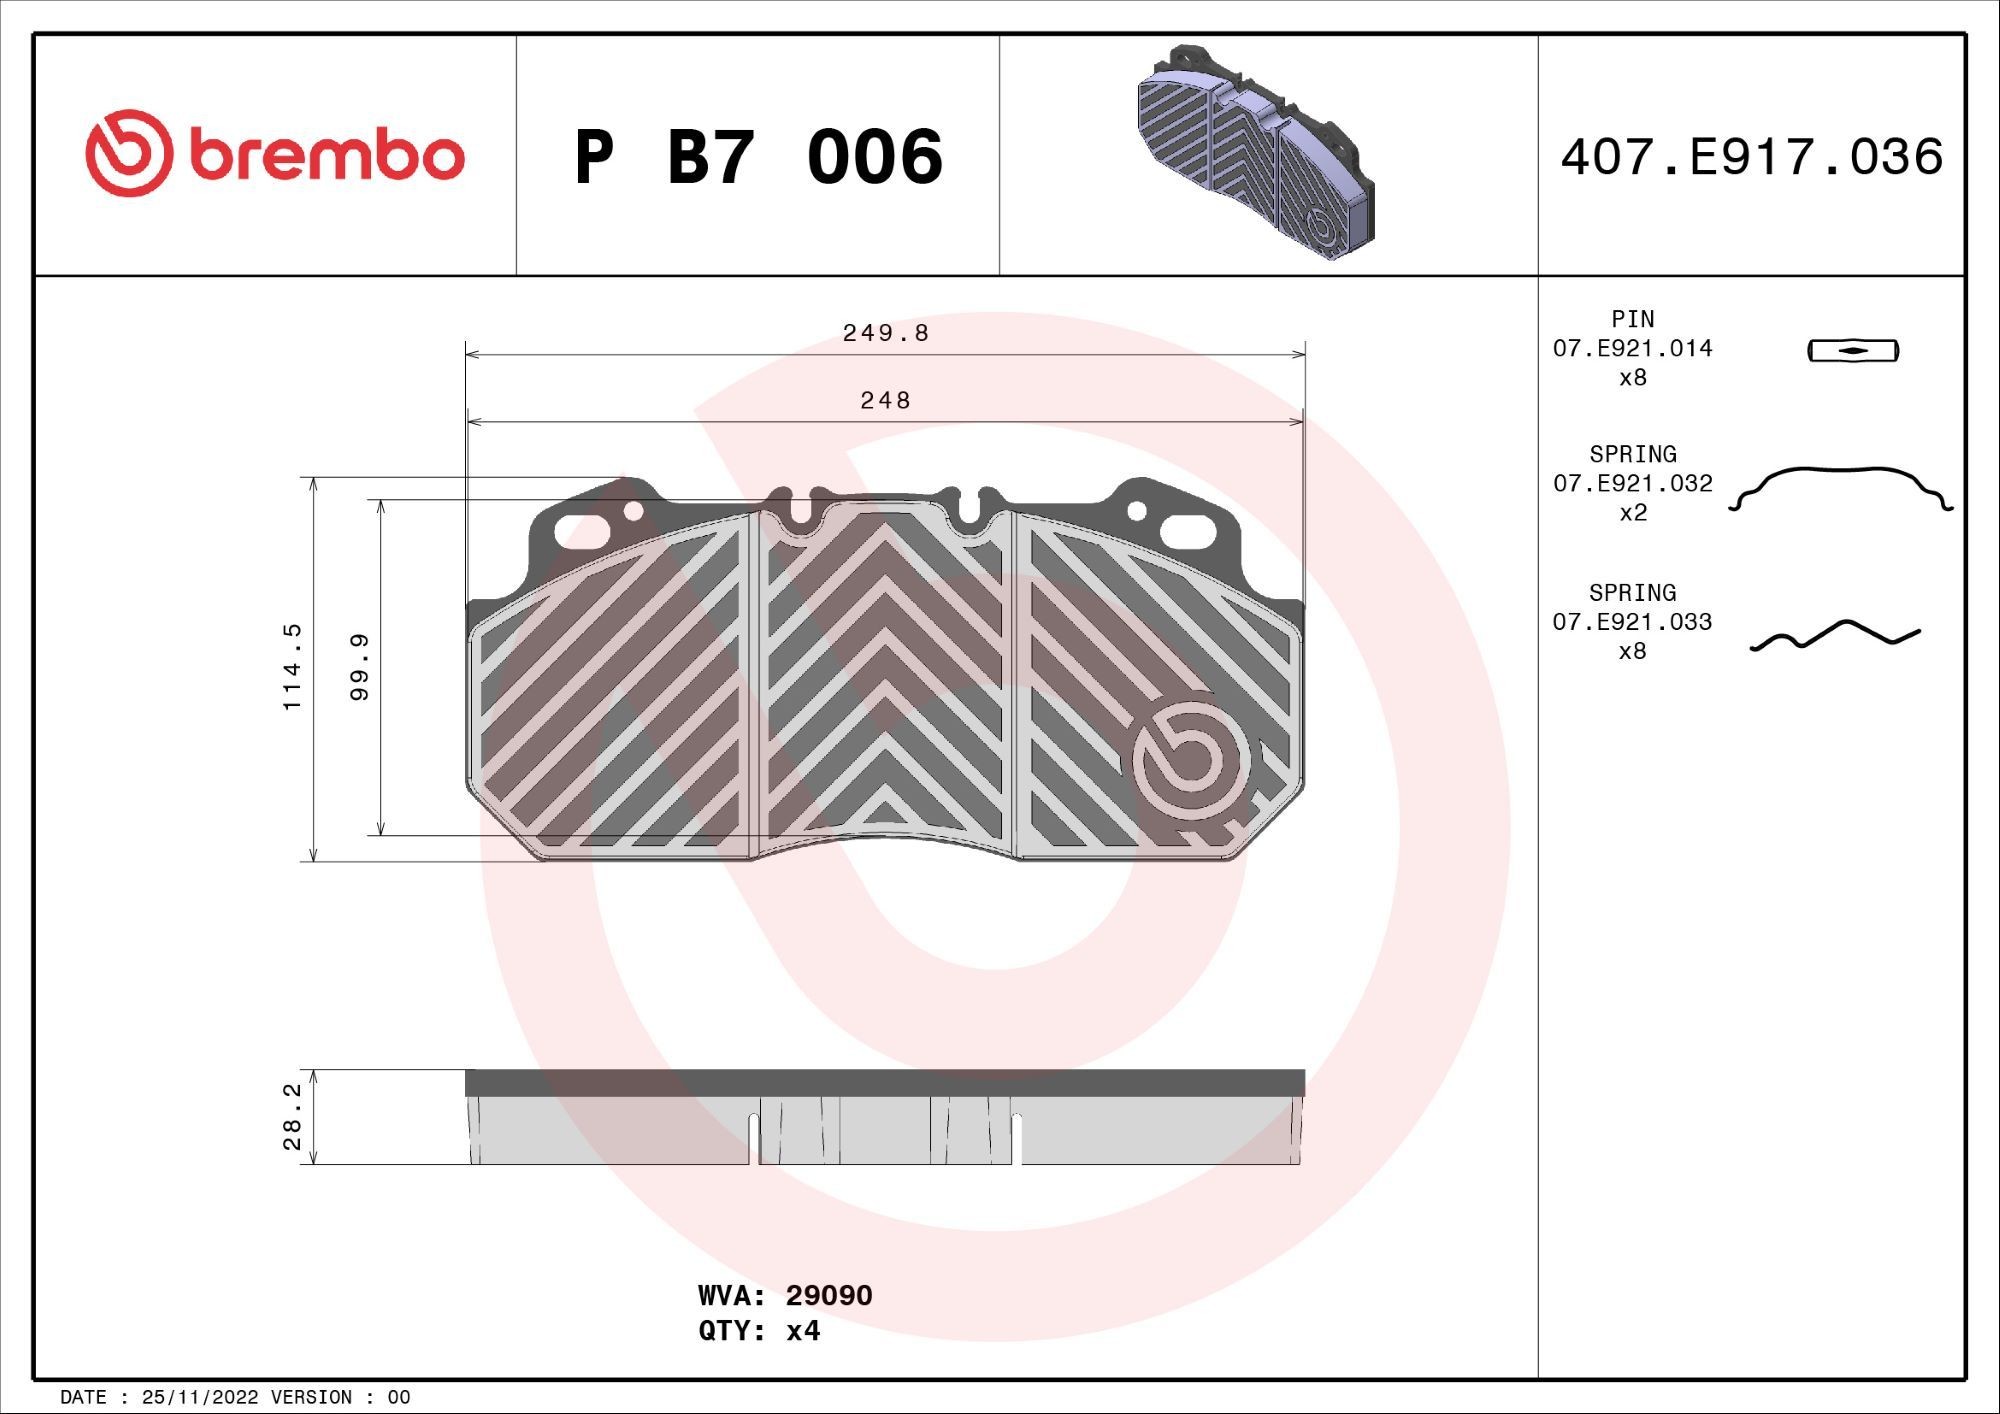 BREMBO prepared for wear indicator, with accessories Height: 115mm, Width: 250mm, Thickness: 28mm Brake pads P B7 006 buy